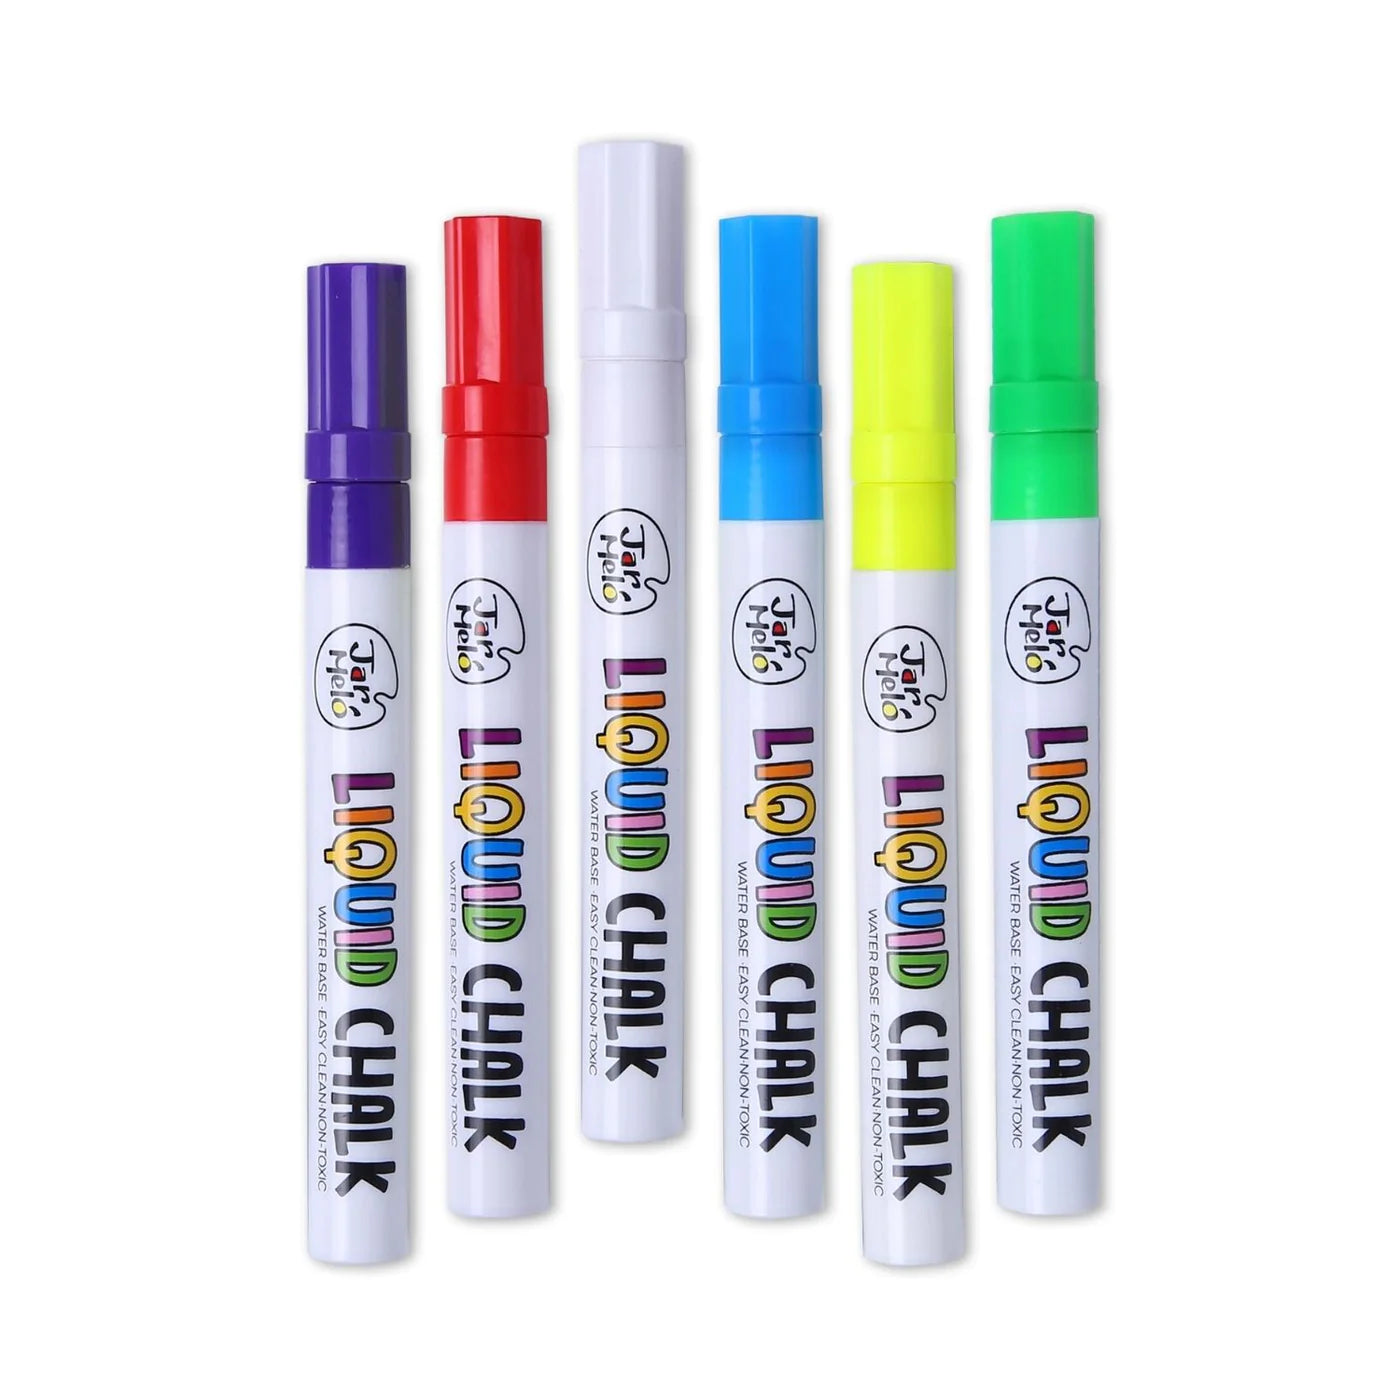 Jar Melo Liquid Chalk Markers (Pack of 6)